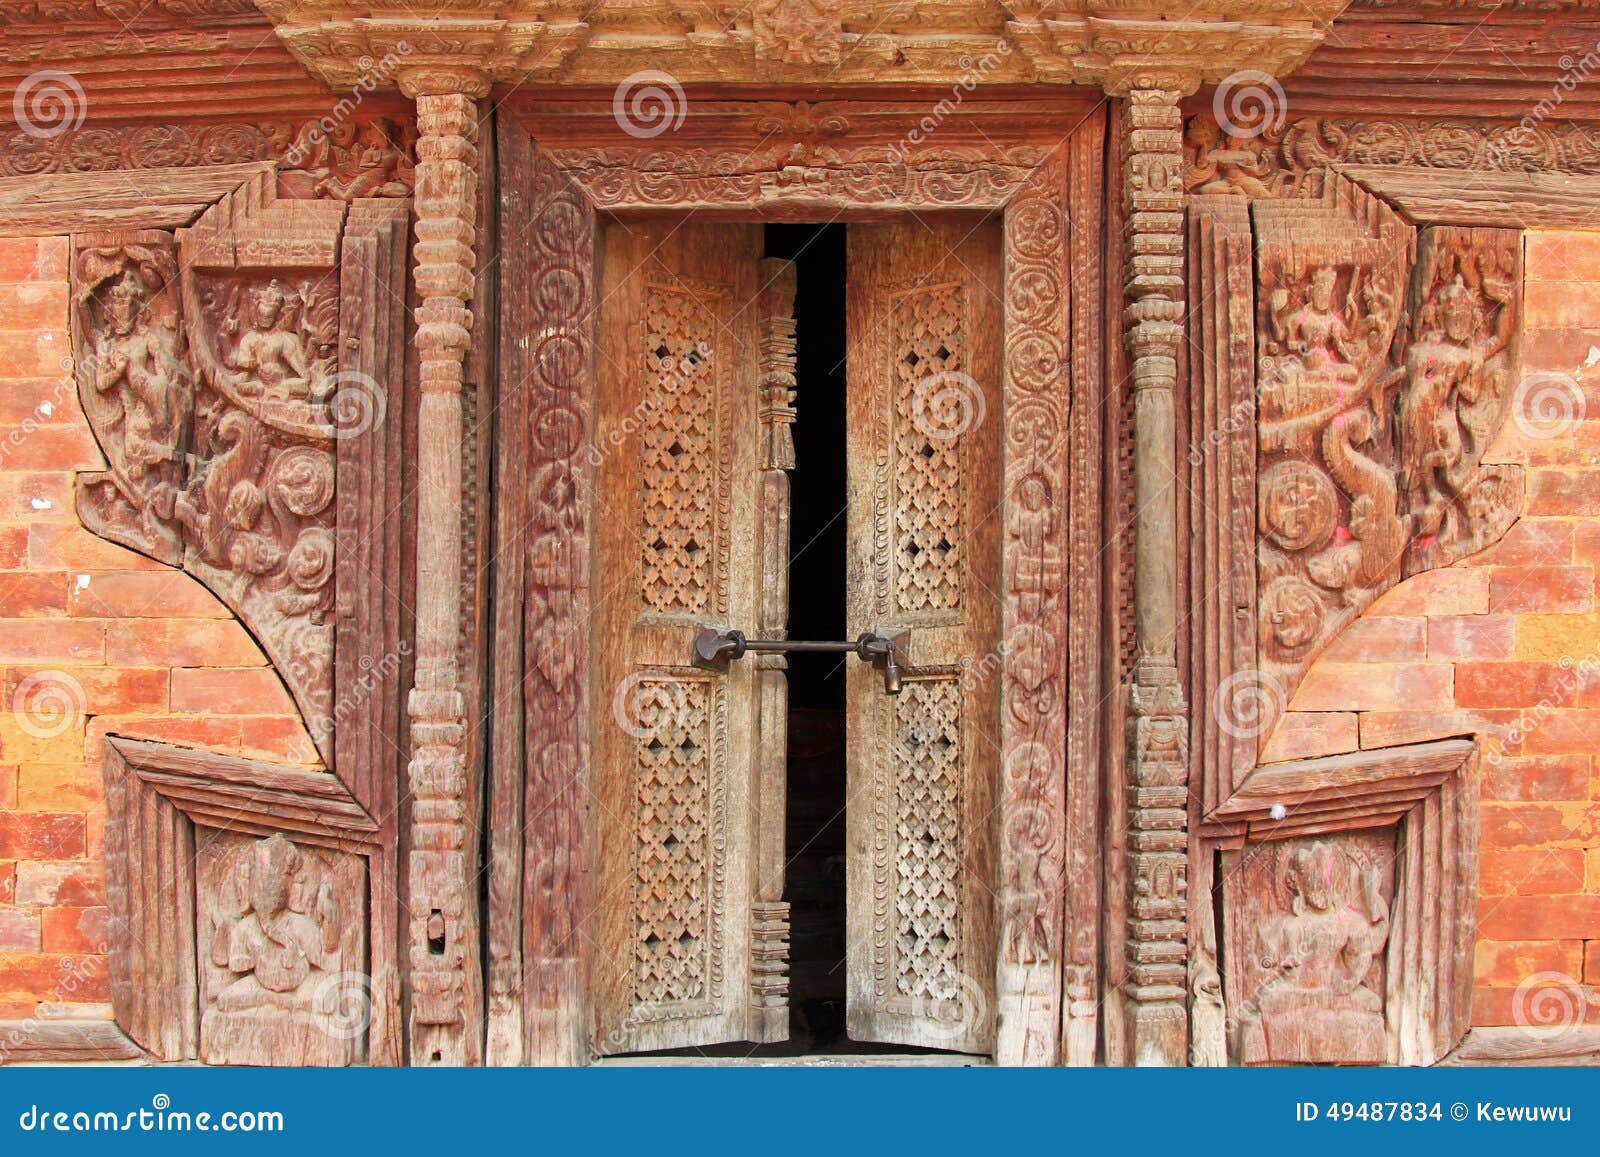 Crafted Wooden Doorframe And Wall  Decoration  In Kathmandu  